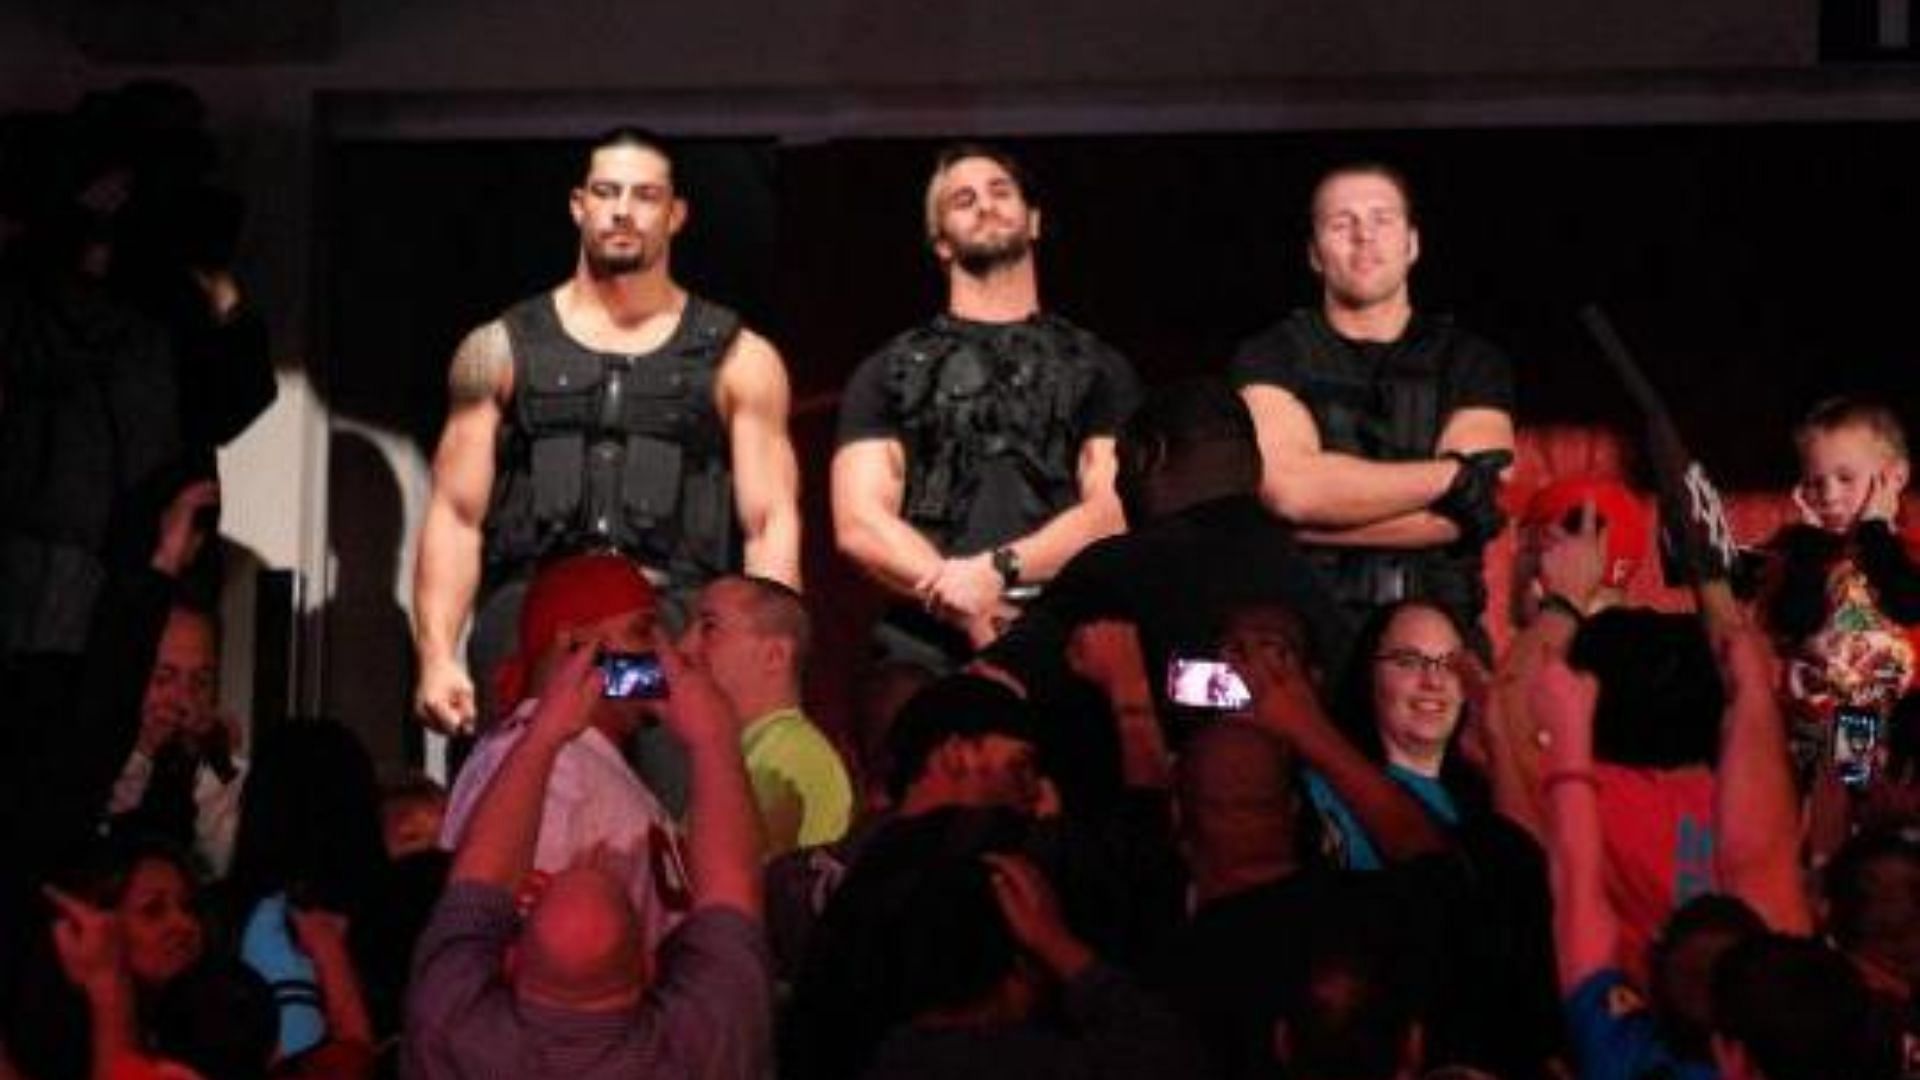 Roman Reigns, Seth Rollins and Jon Moxley defined the last decade as the top guys of the pro-wrestling world